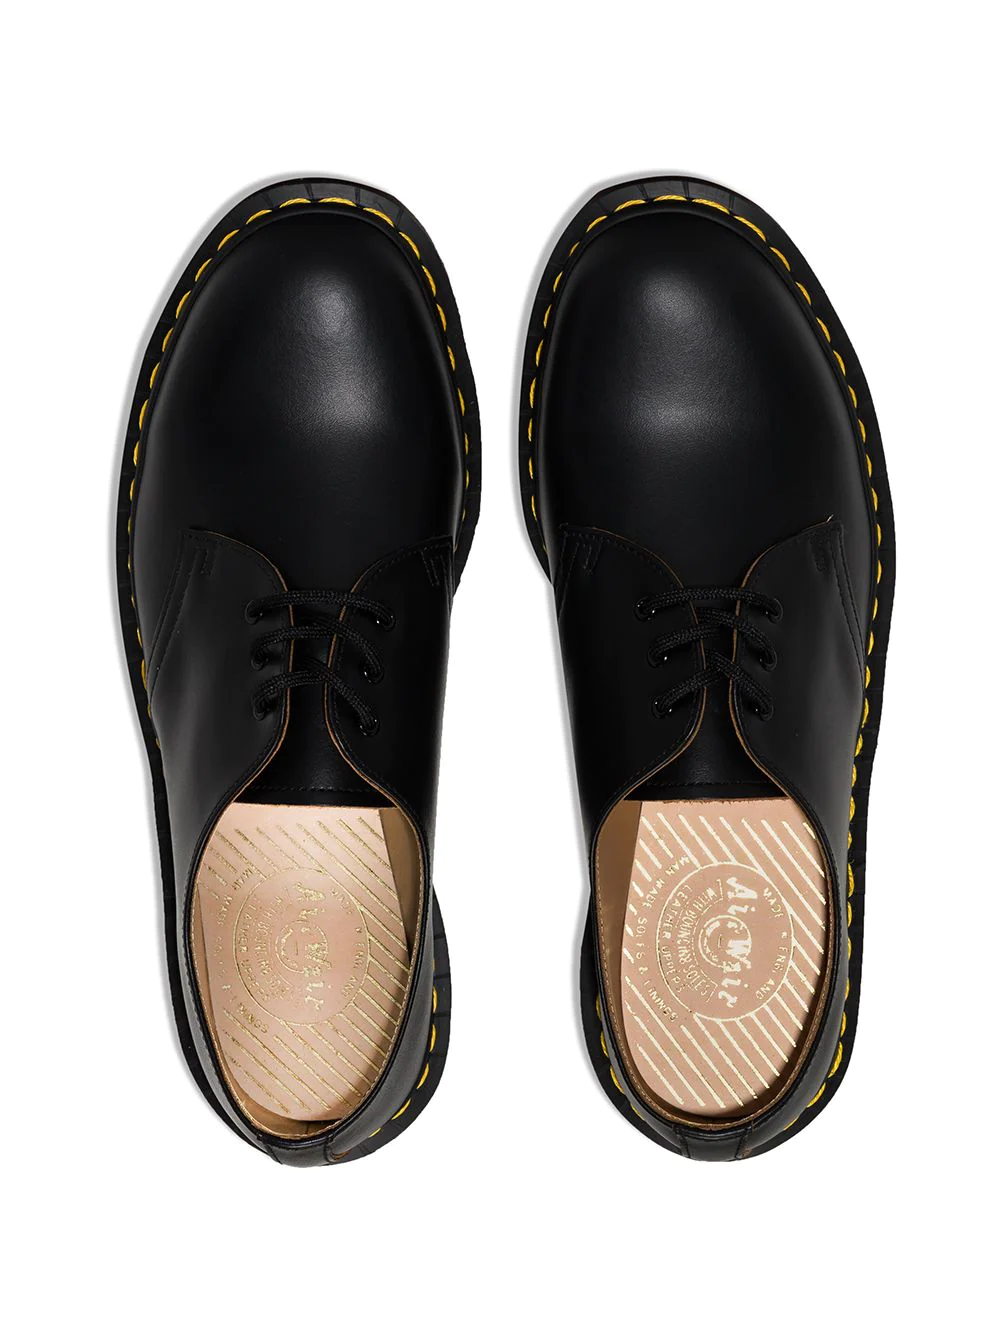 DR. MARTENS 1461 Vintage Made In England Oxford Shoes